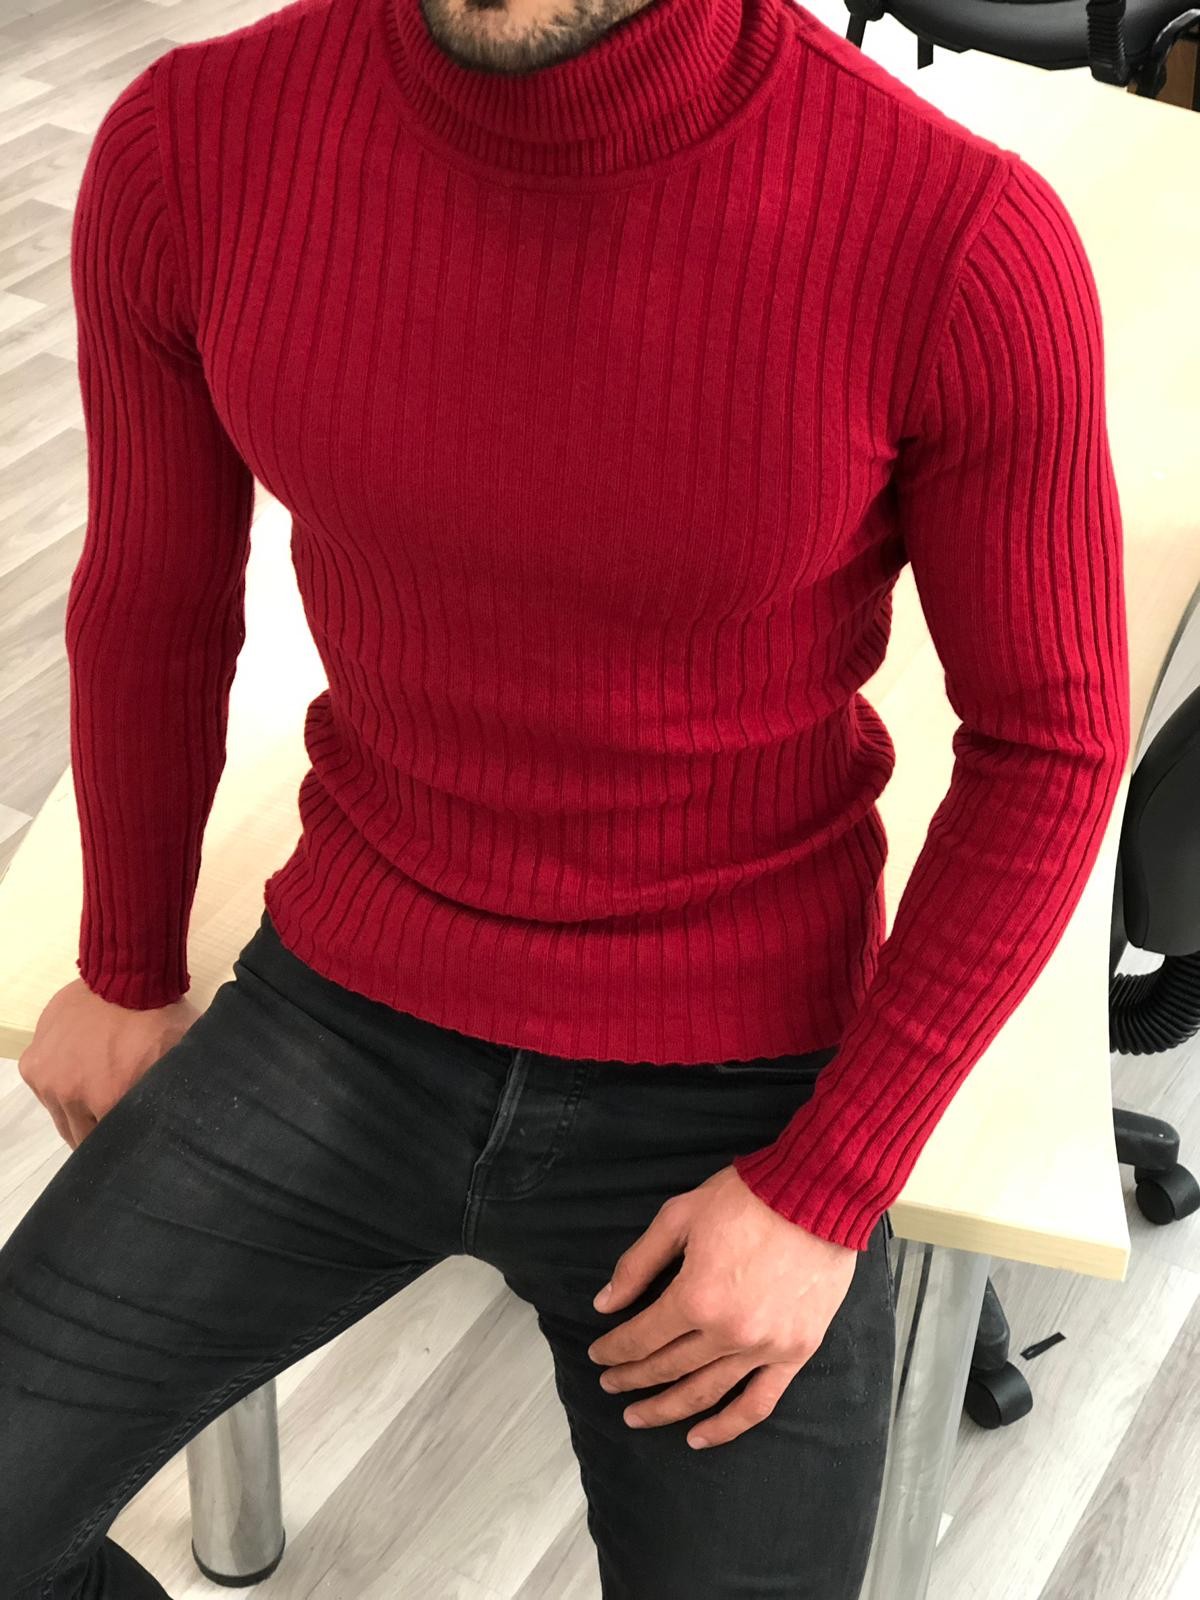 Buy Red Slim Fit Turtleneck Sweater by  with Free Shipping